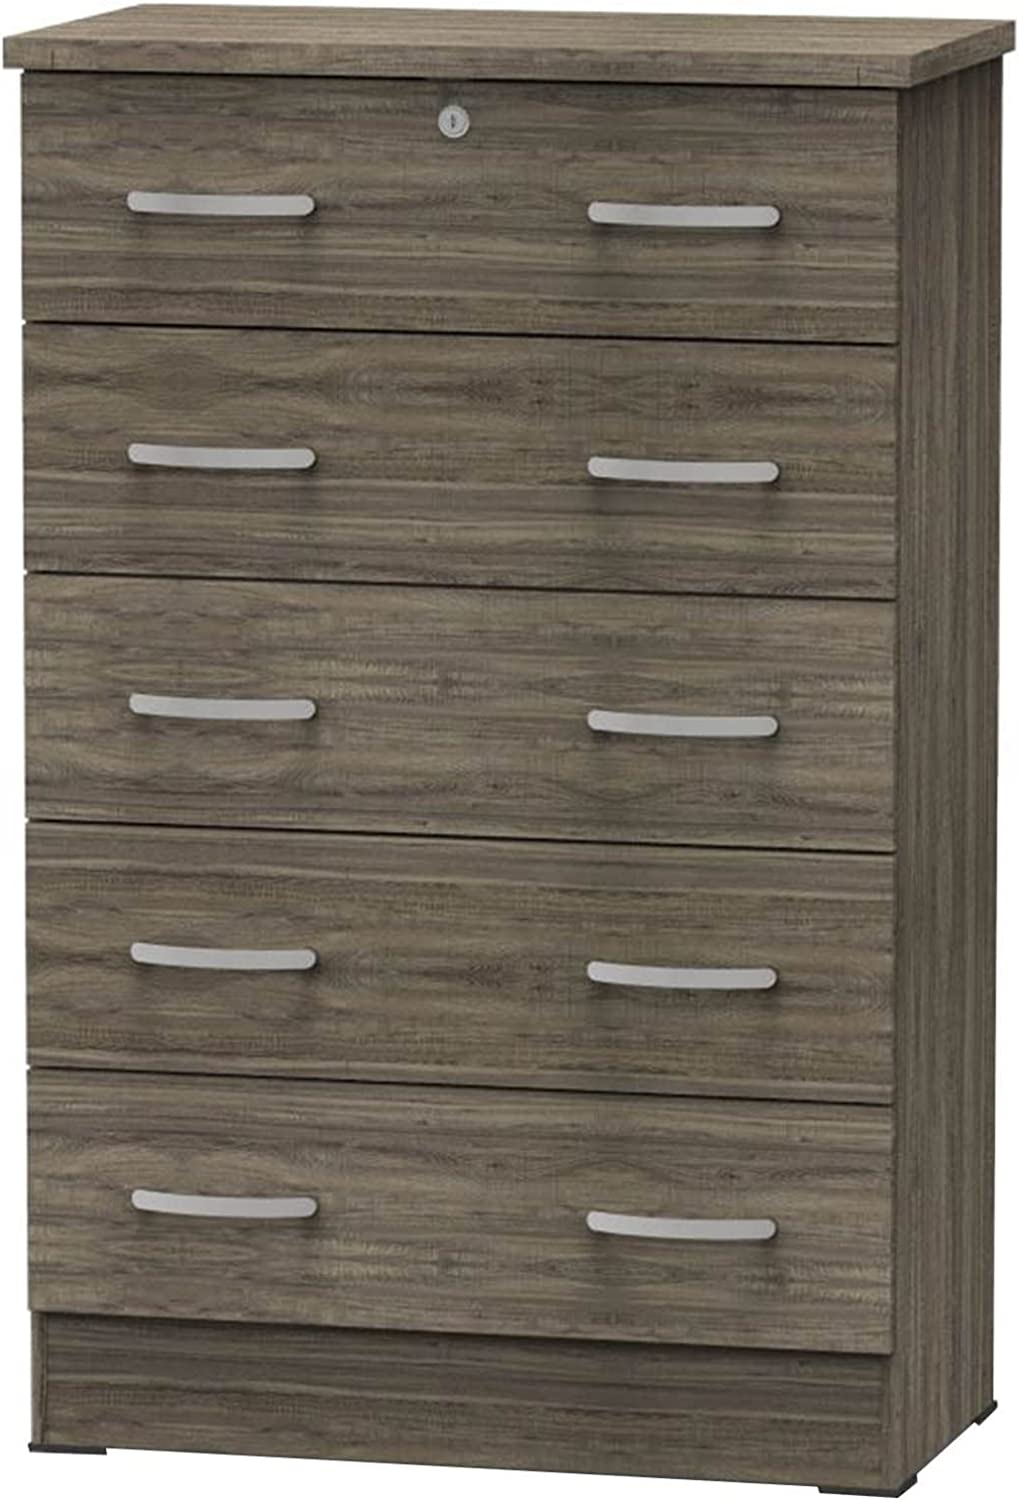 Better Home Products Cindy 5 Drawer Chest Wooden Dresser with Lock in Silver